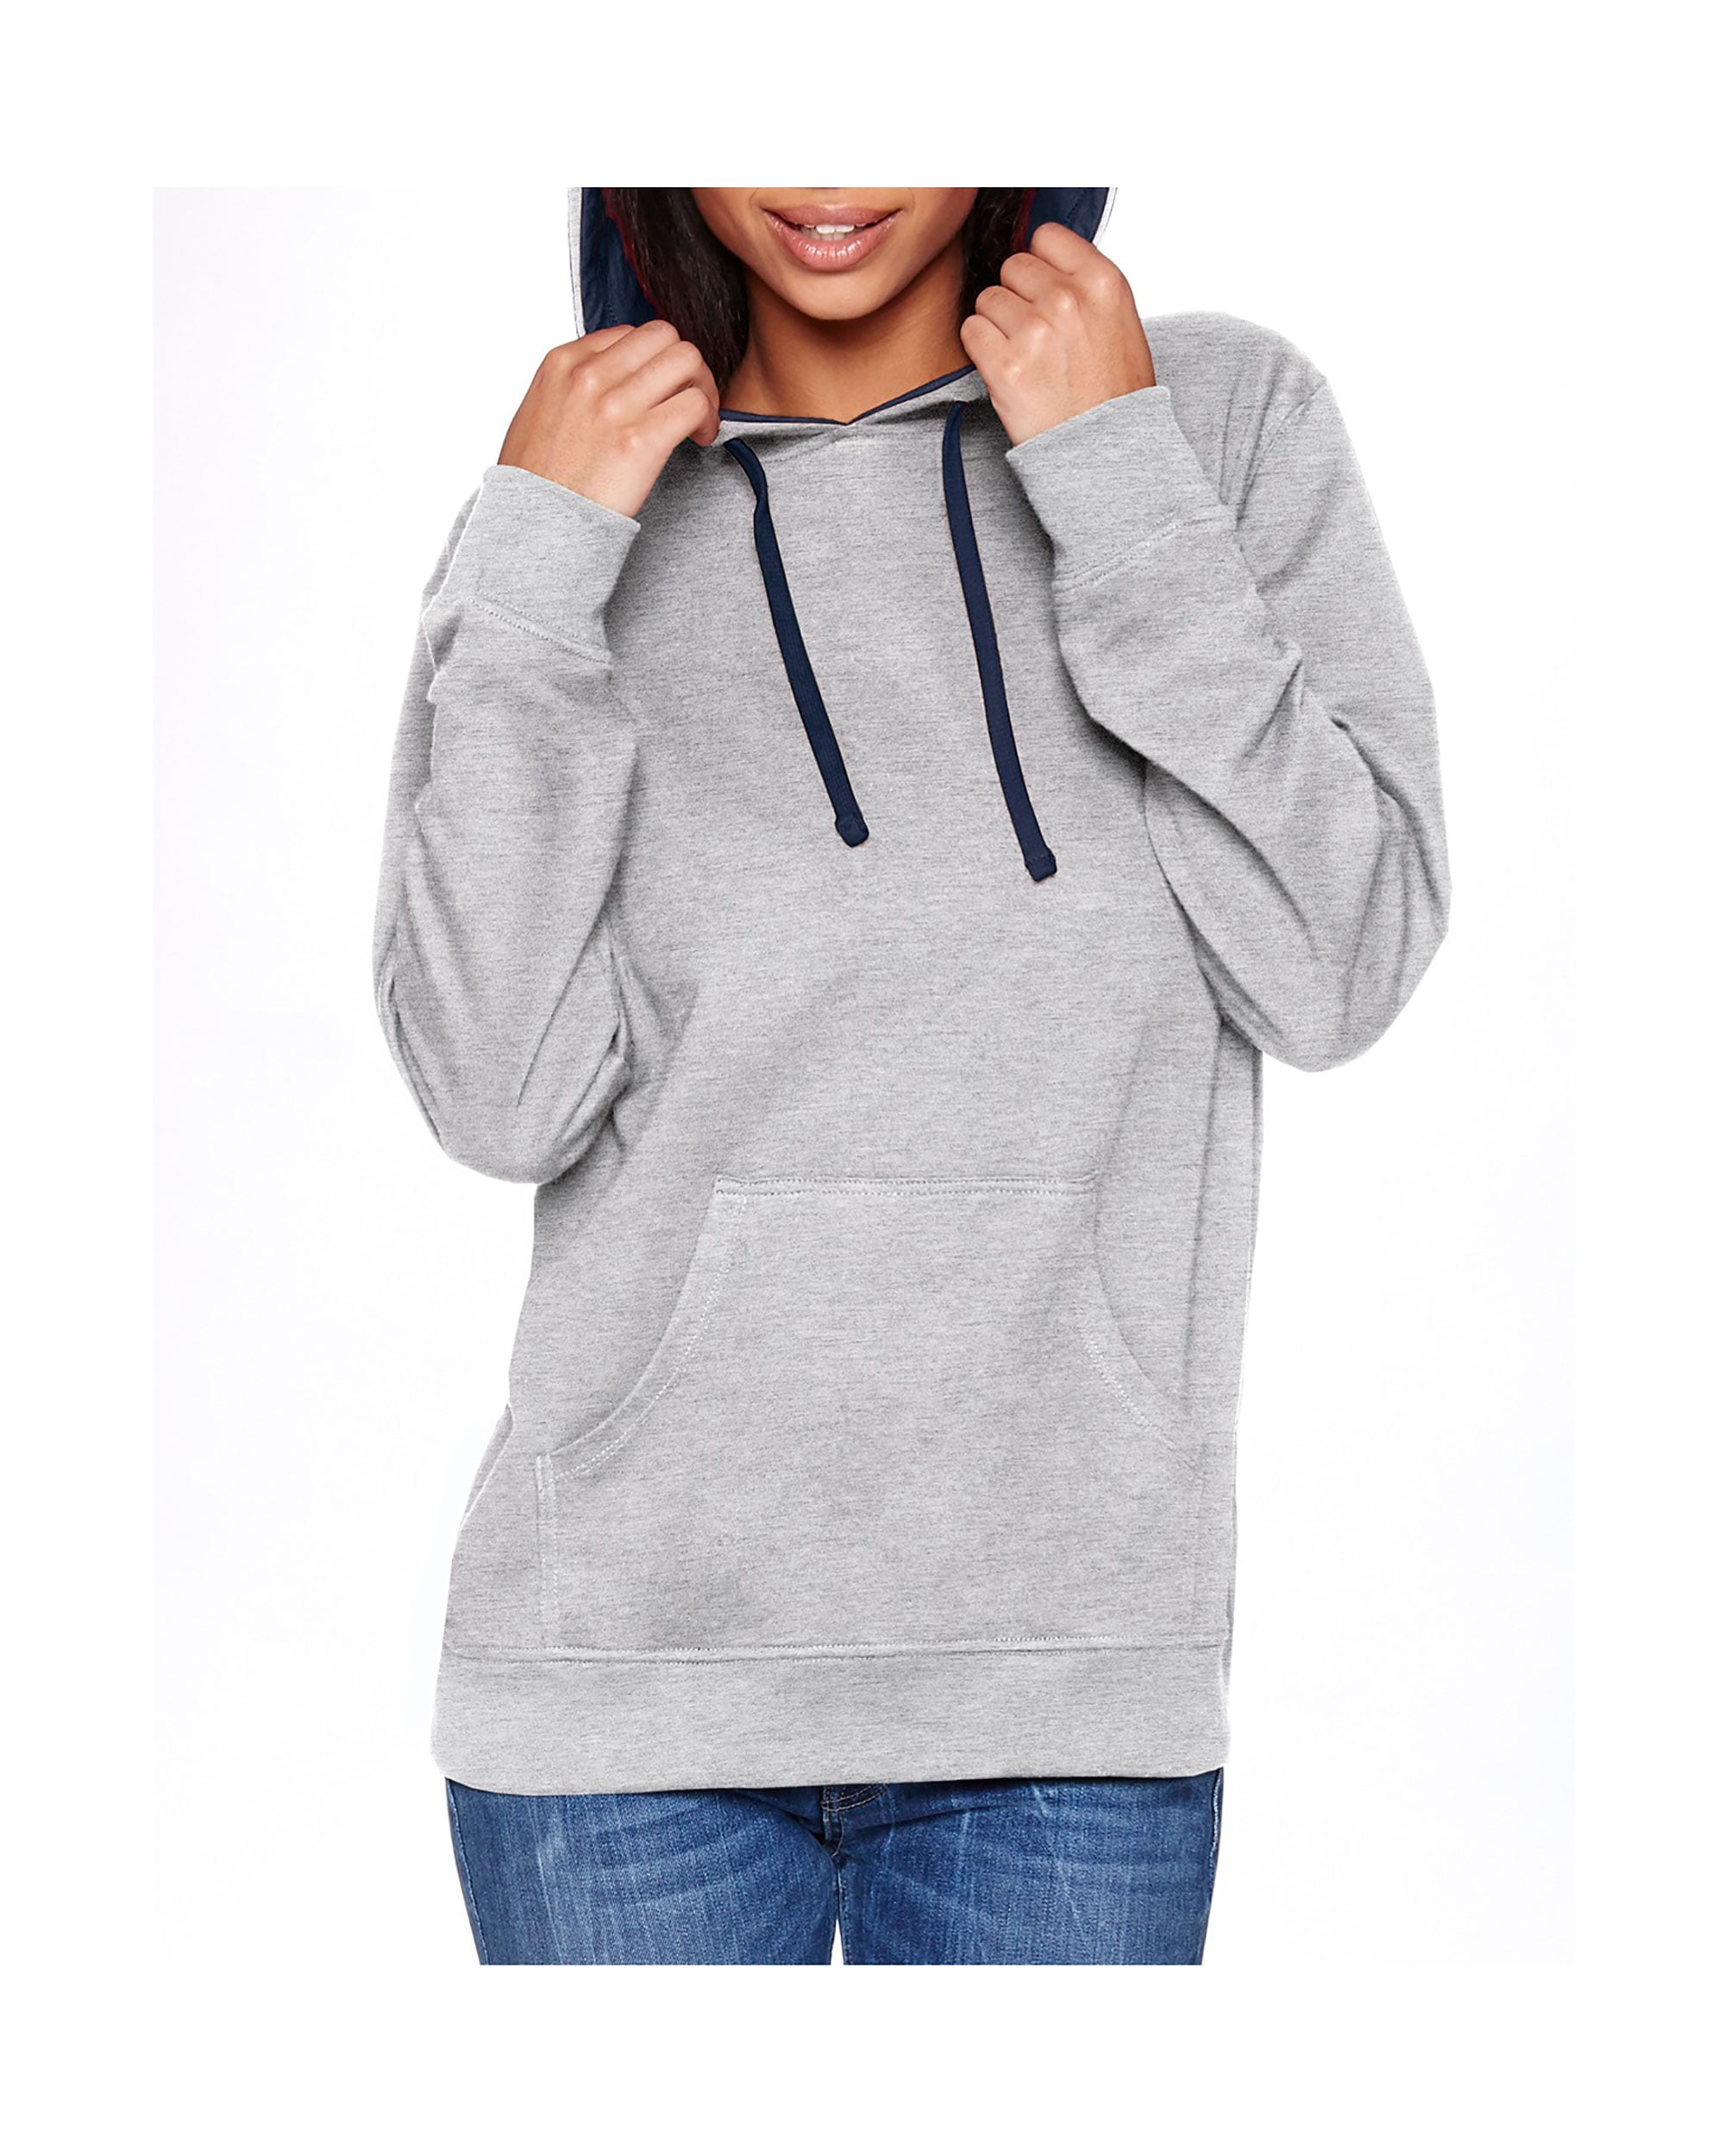 Next Level Adult French Terry Pullover Hoodie 9301 